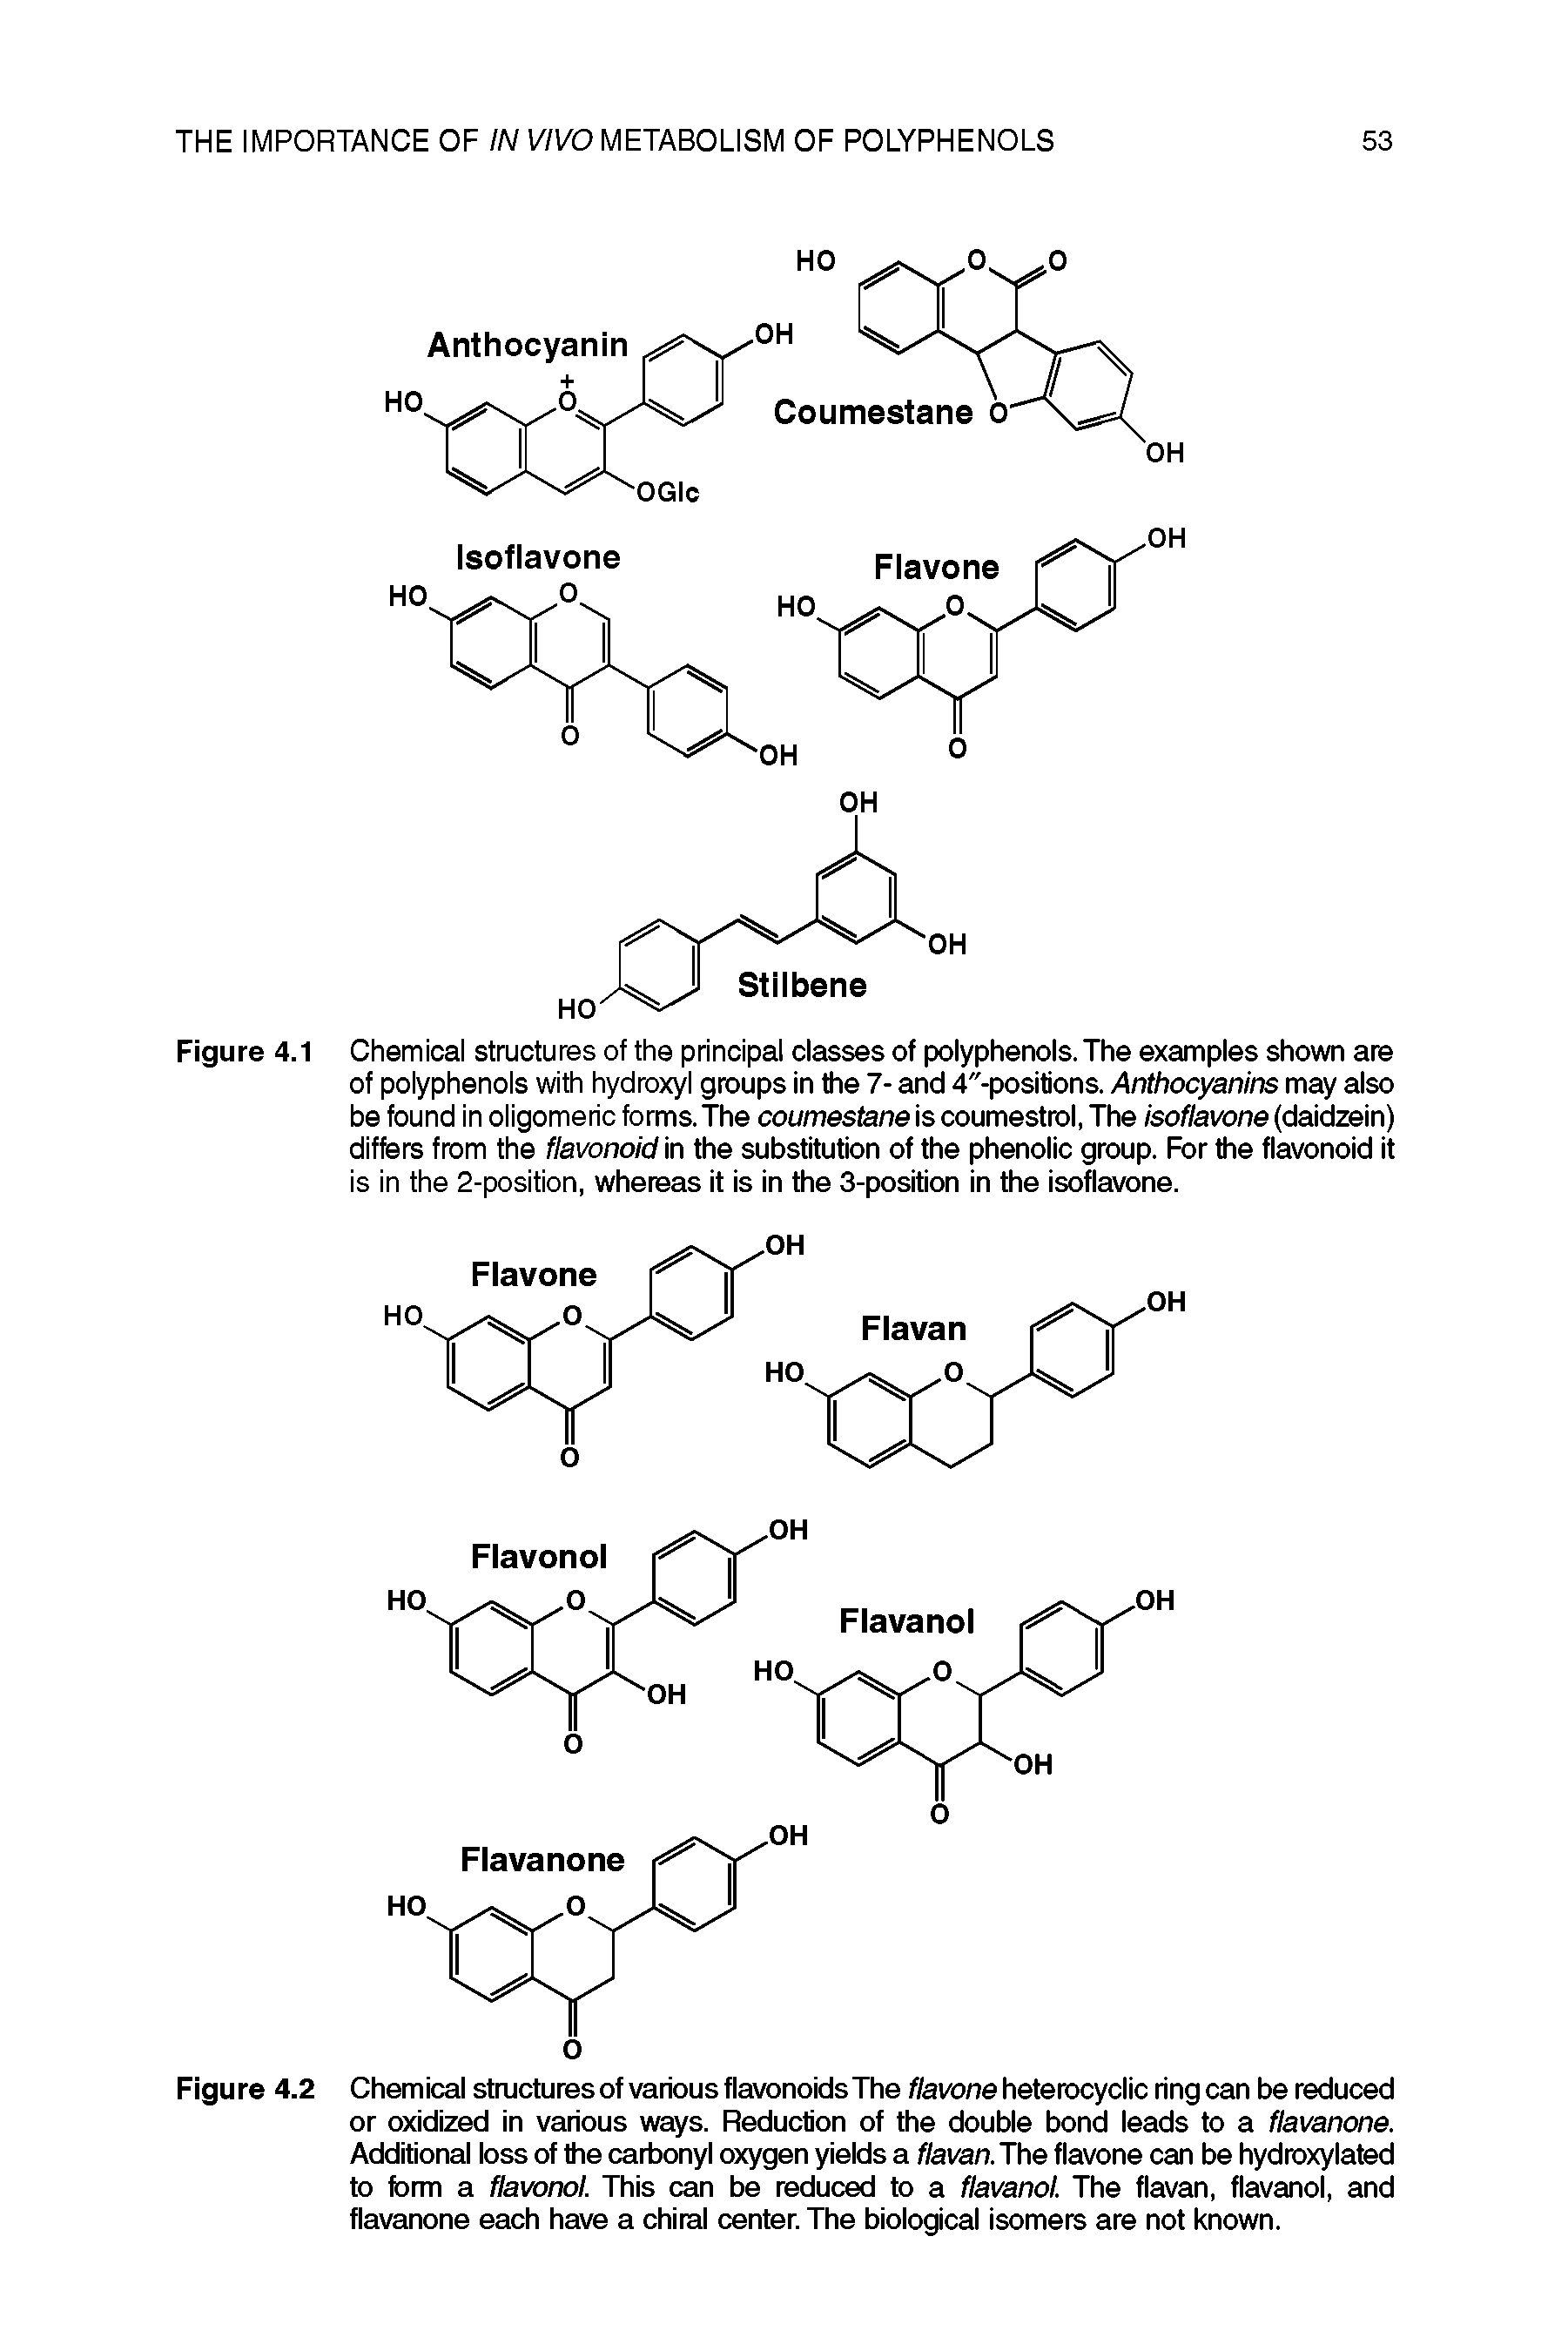 Figure 4.1 Chemical structures of the principal classes of polyphenols. The examples shown are of polyphenols with hydroxyl groups in the 7- and 4"-positions. Anthocyanins may also be found in oligomeric forms. The coumestane is coumestrol, The isoflavone (daidzein) differs from the flavonoid h the substitution of the phenolic group. For the flavonoid it is in the 2-position, whereas it is in the 3-position in the isoflavone.